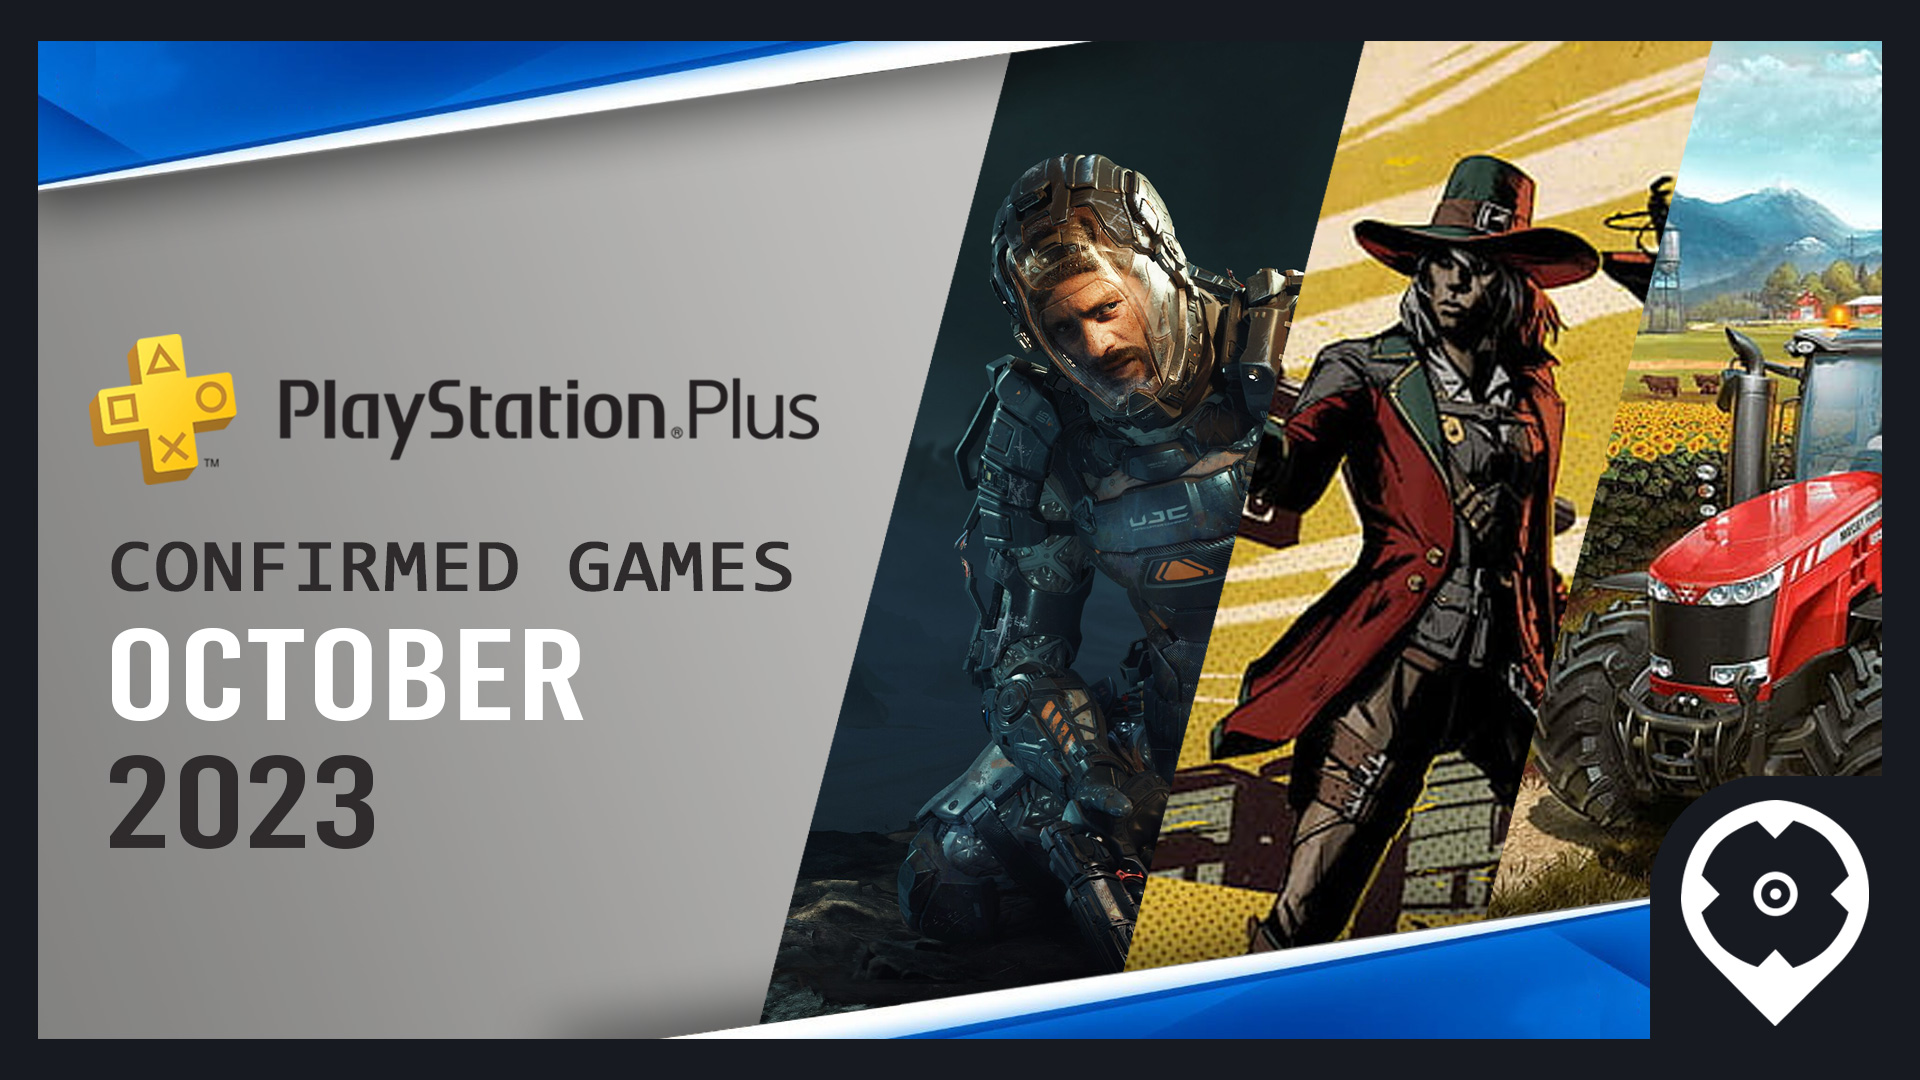 PlayStation Plus Free Games For October 2023 Confirmed